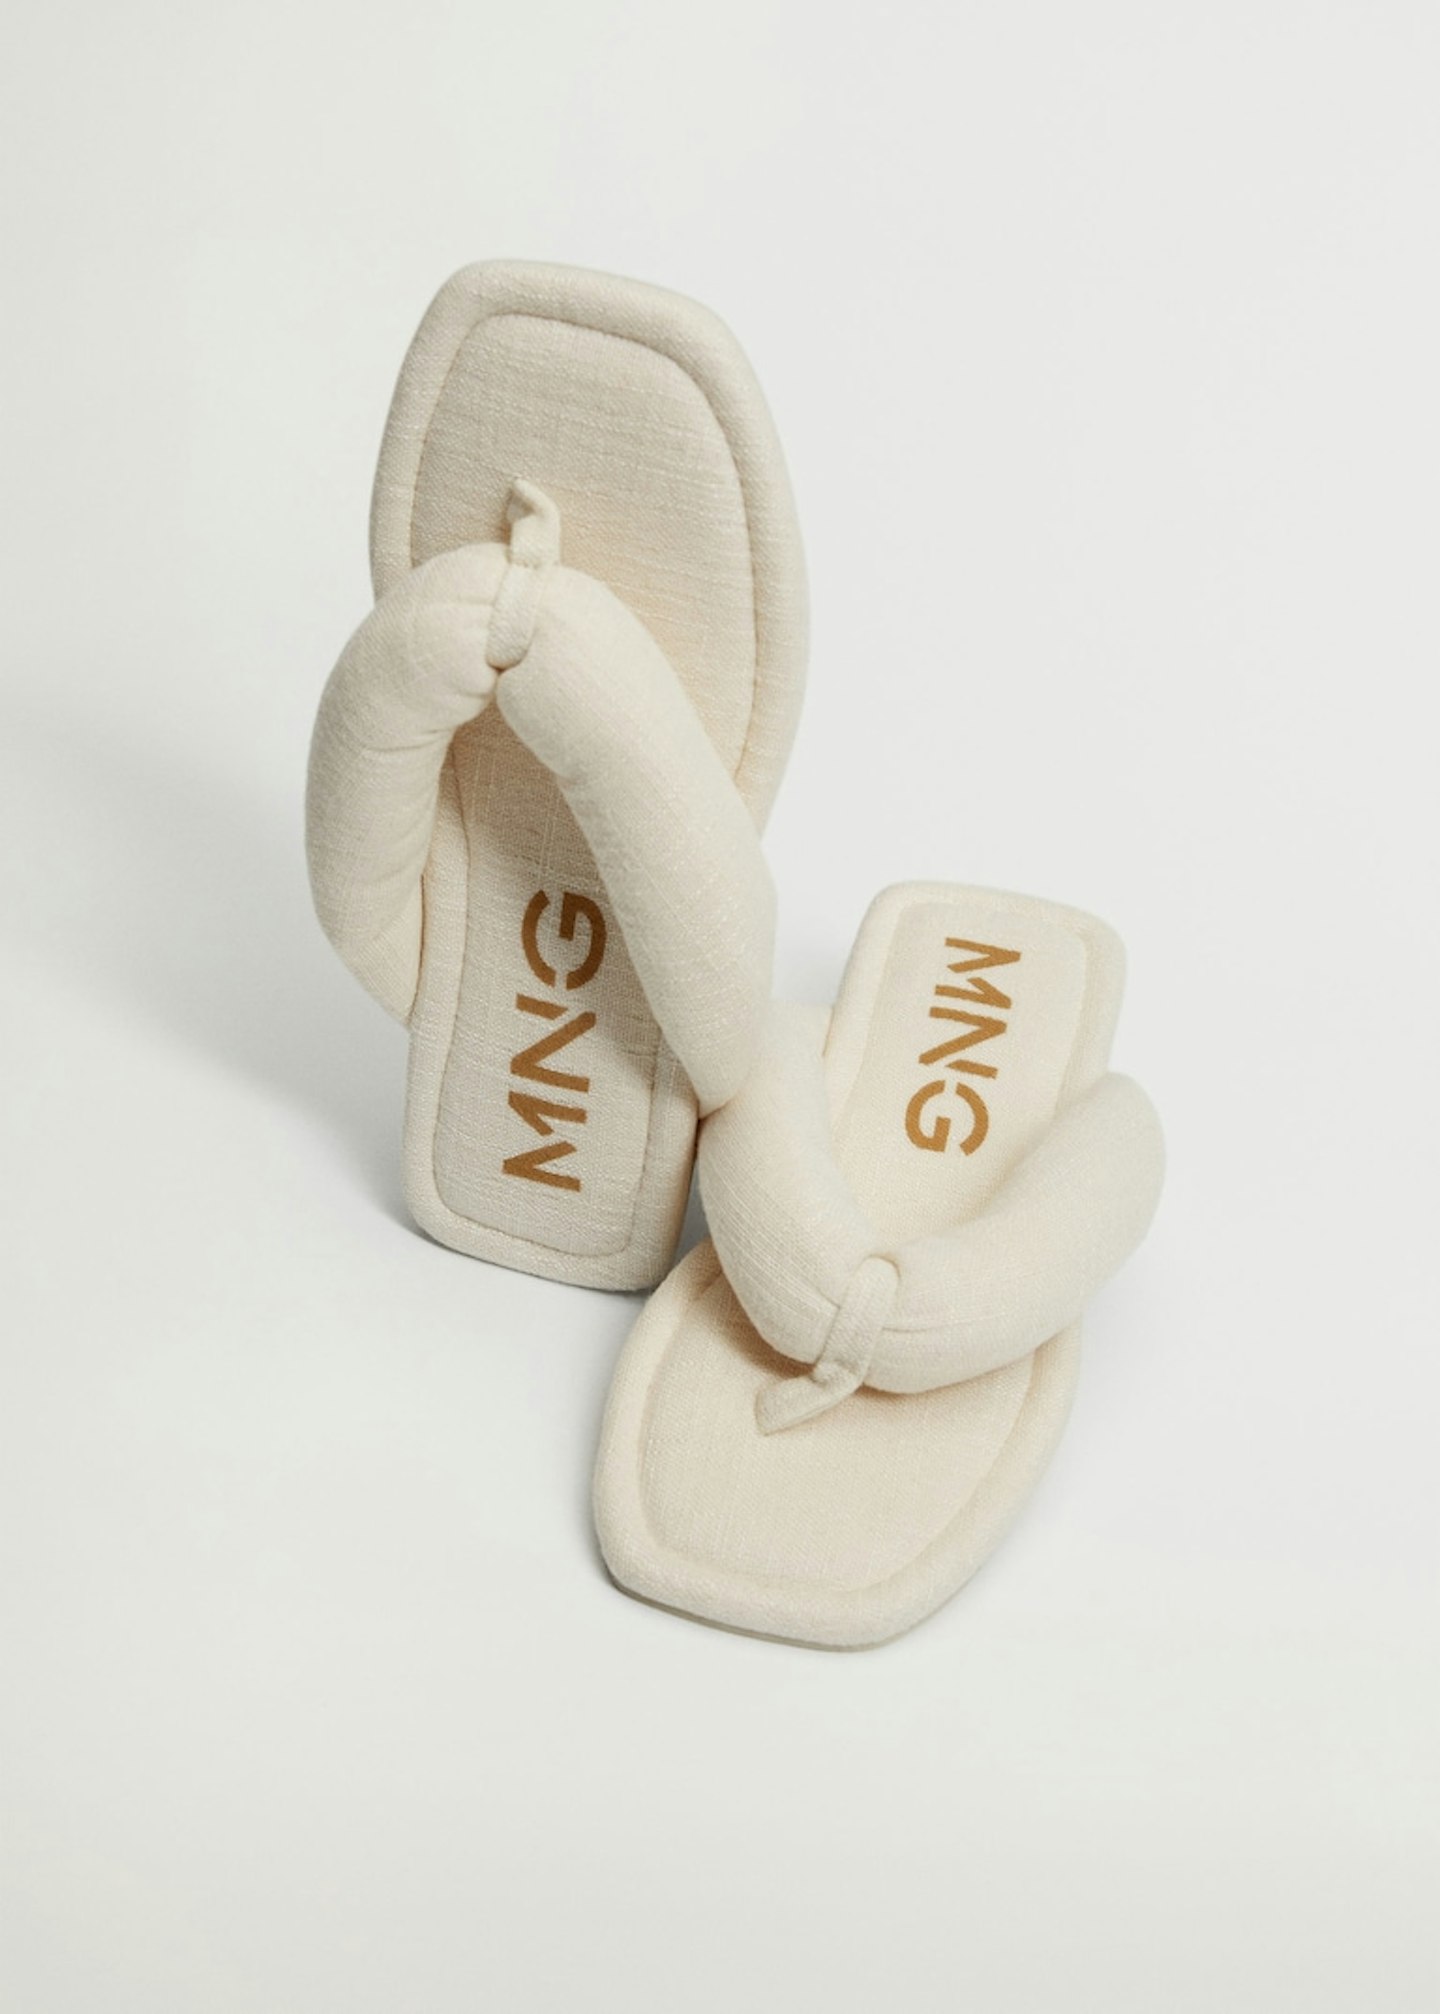 Mango, Quilted Cotton Shoes, £19.99